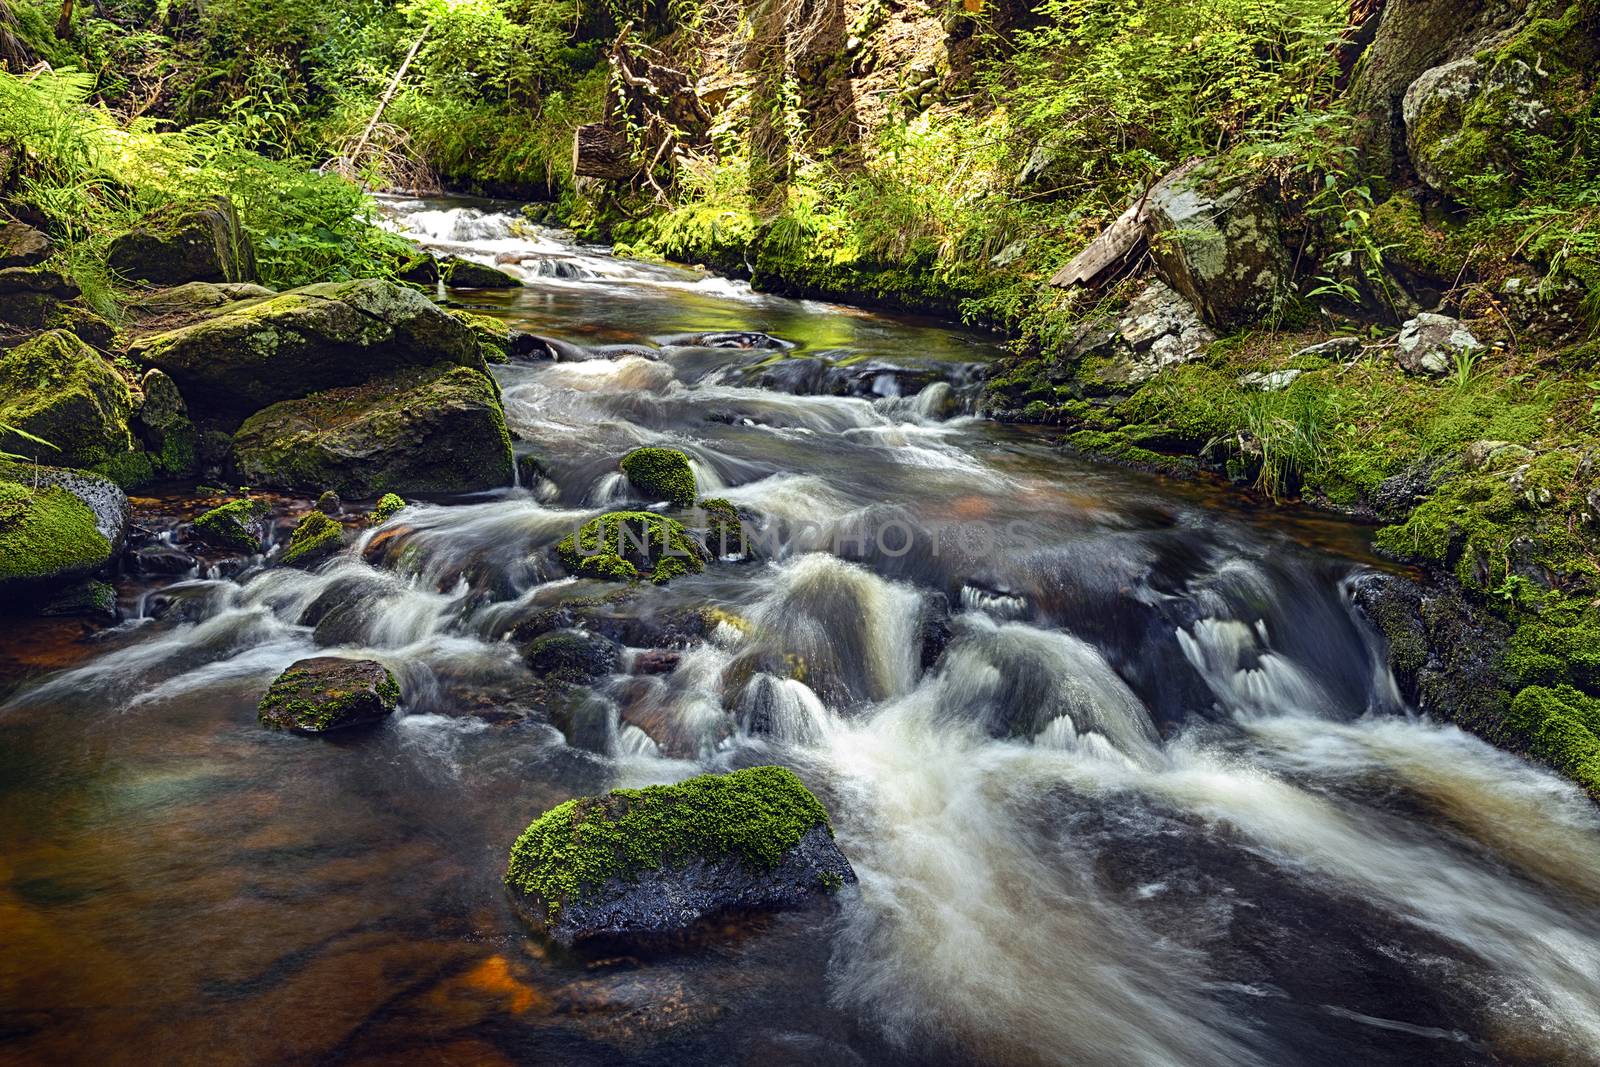 River runs over boulders in the primeval forest by hanusst